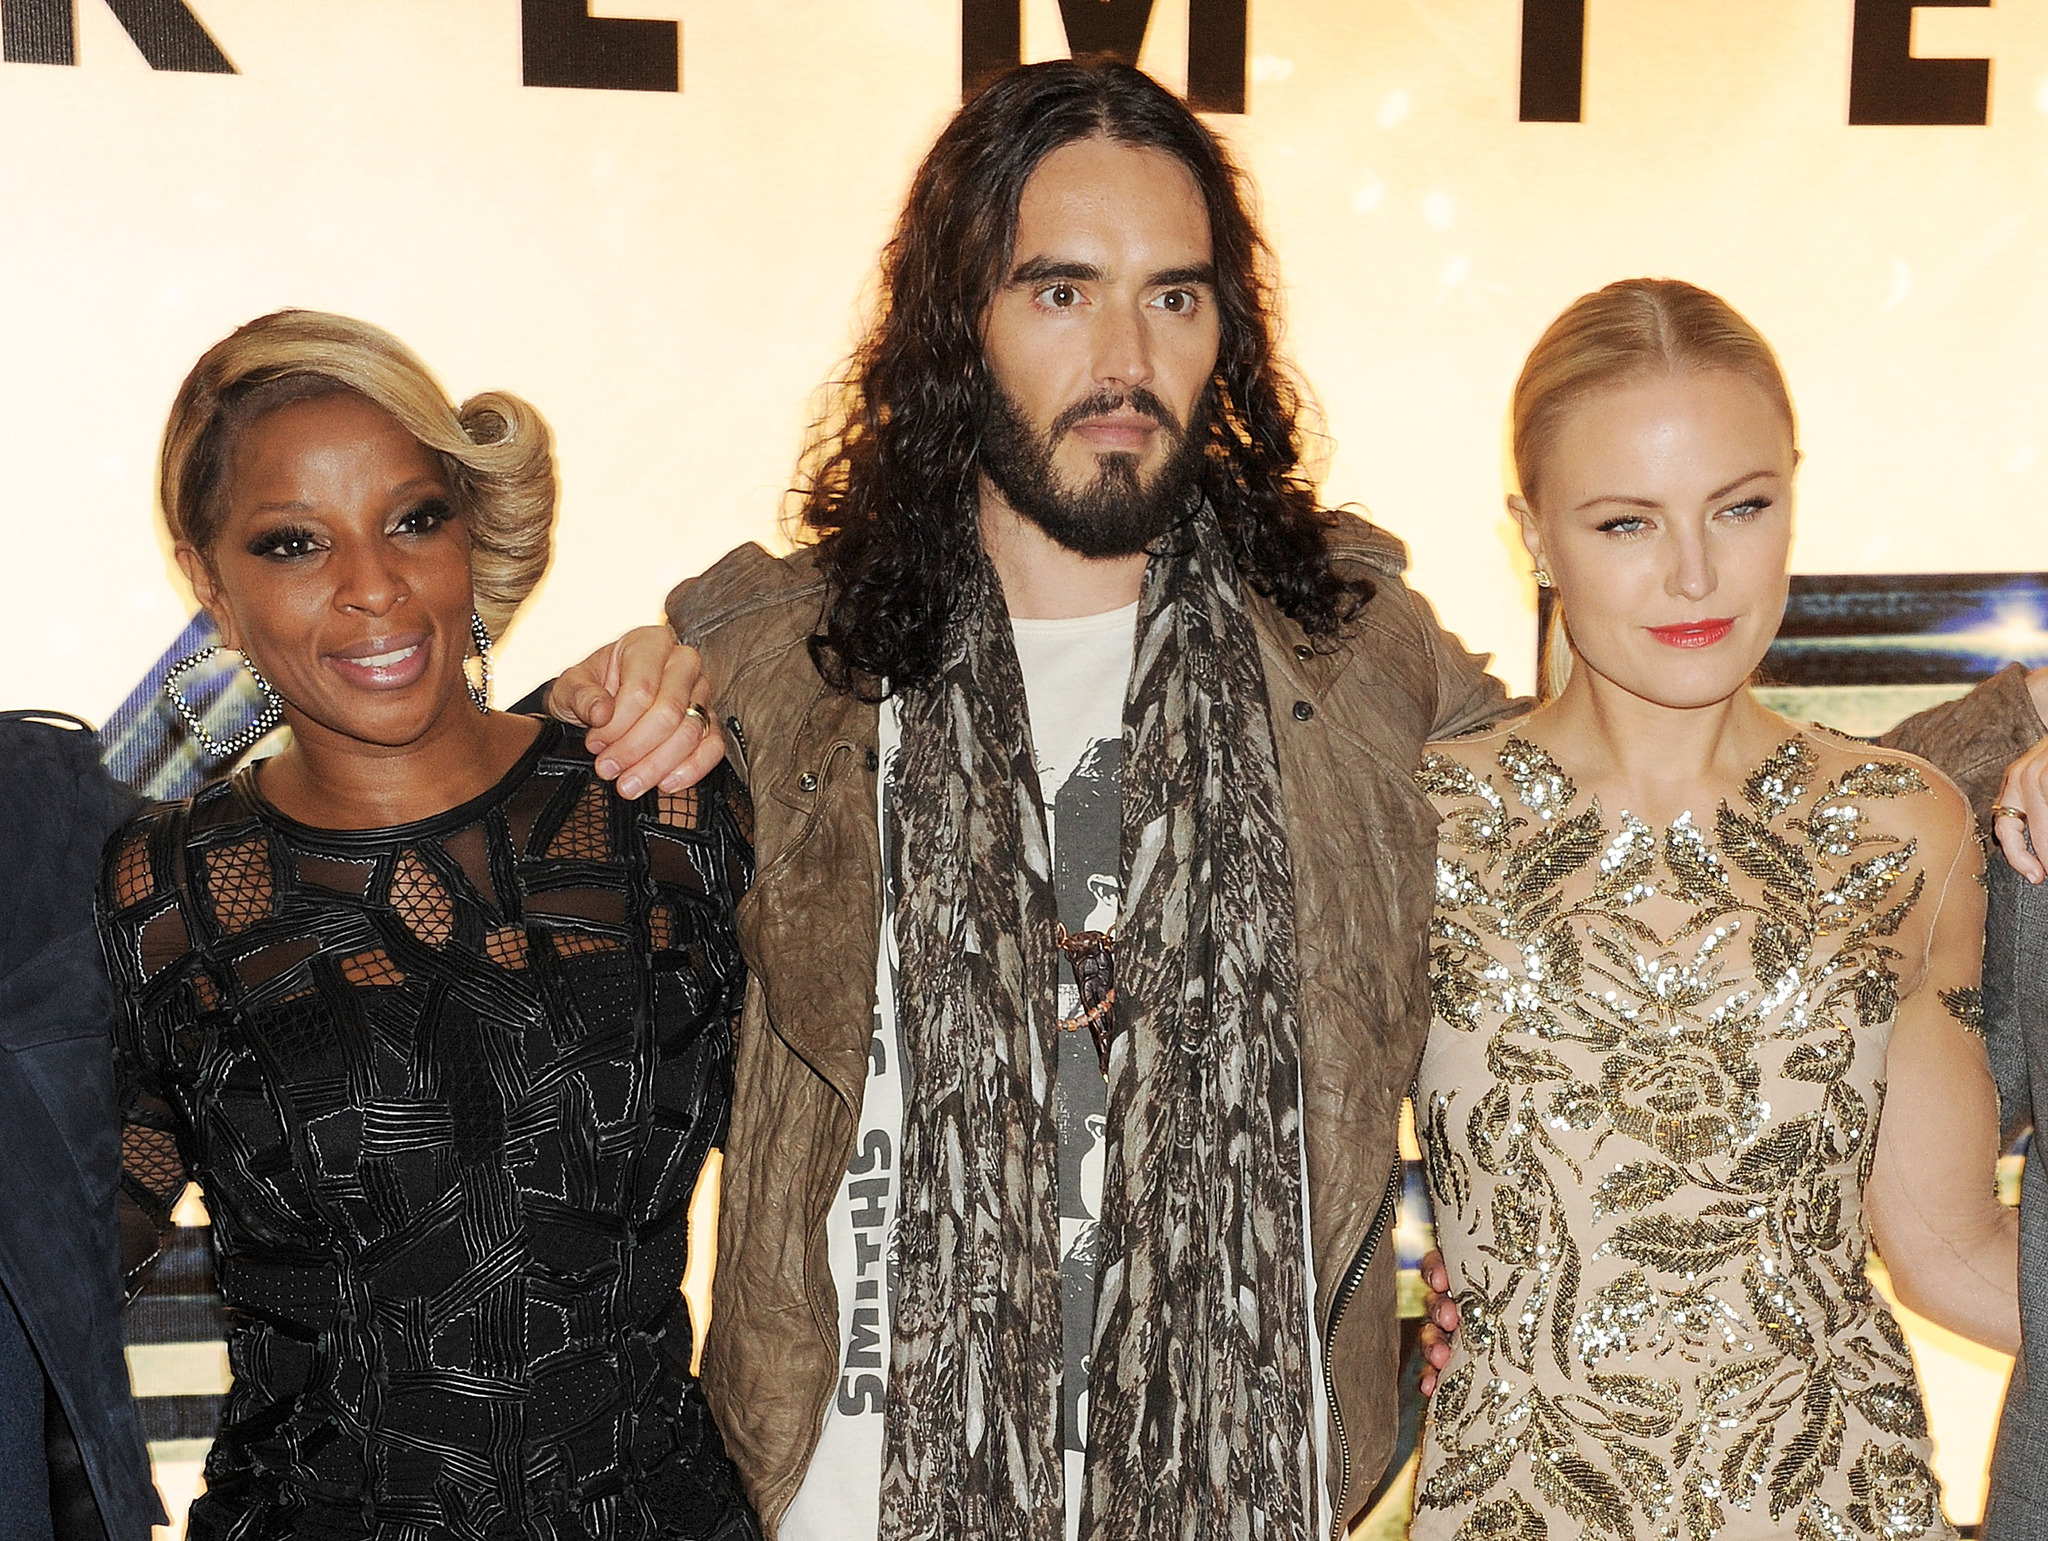 Mary J. Blige, Malin Akerman and Russell Brand at event of Roko amzius (2012)